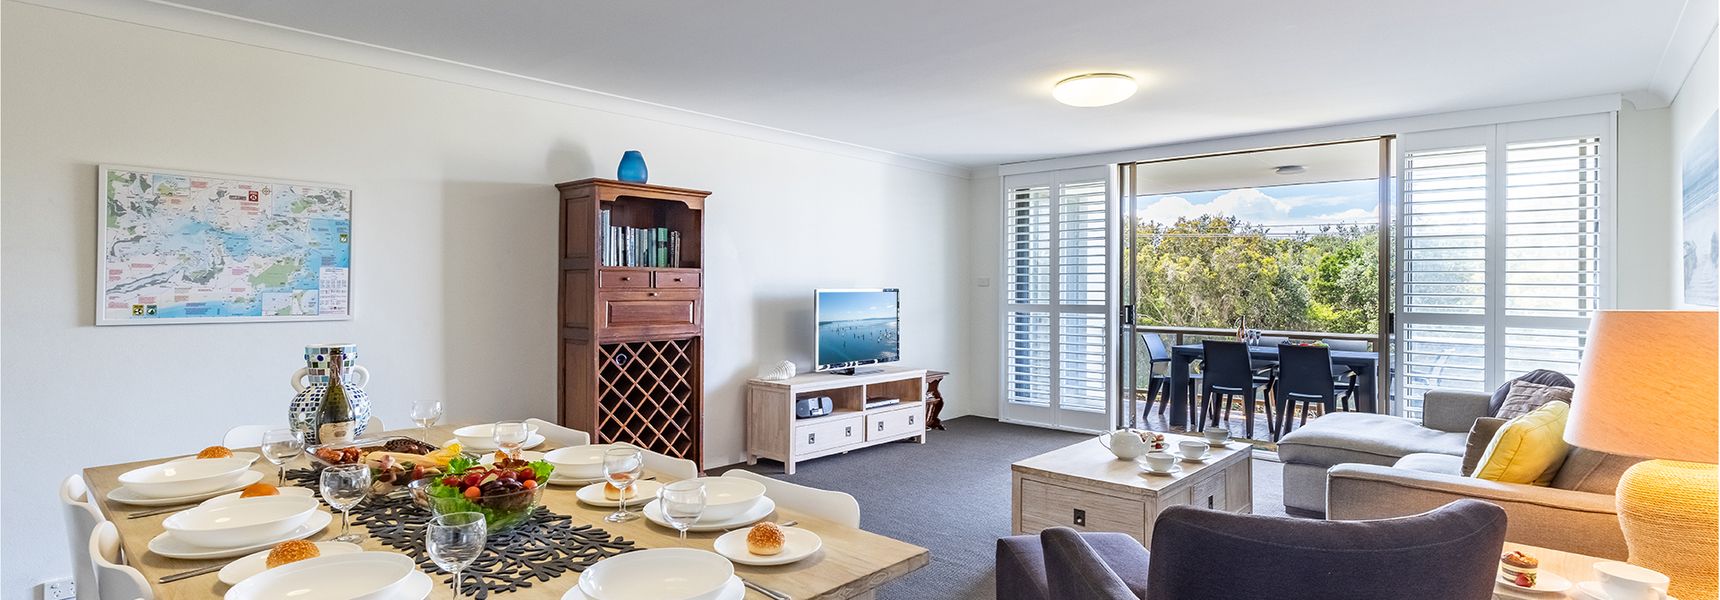 The Dunes, 15/38 Marine Dr – fabulous unit with pool, tennis court & across the road to the beach